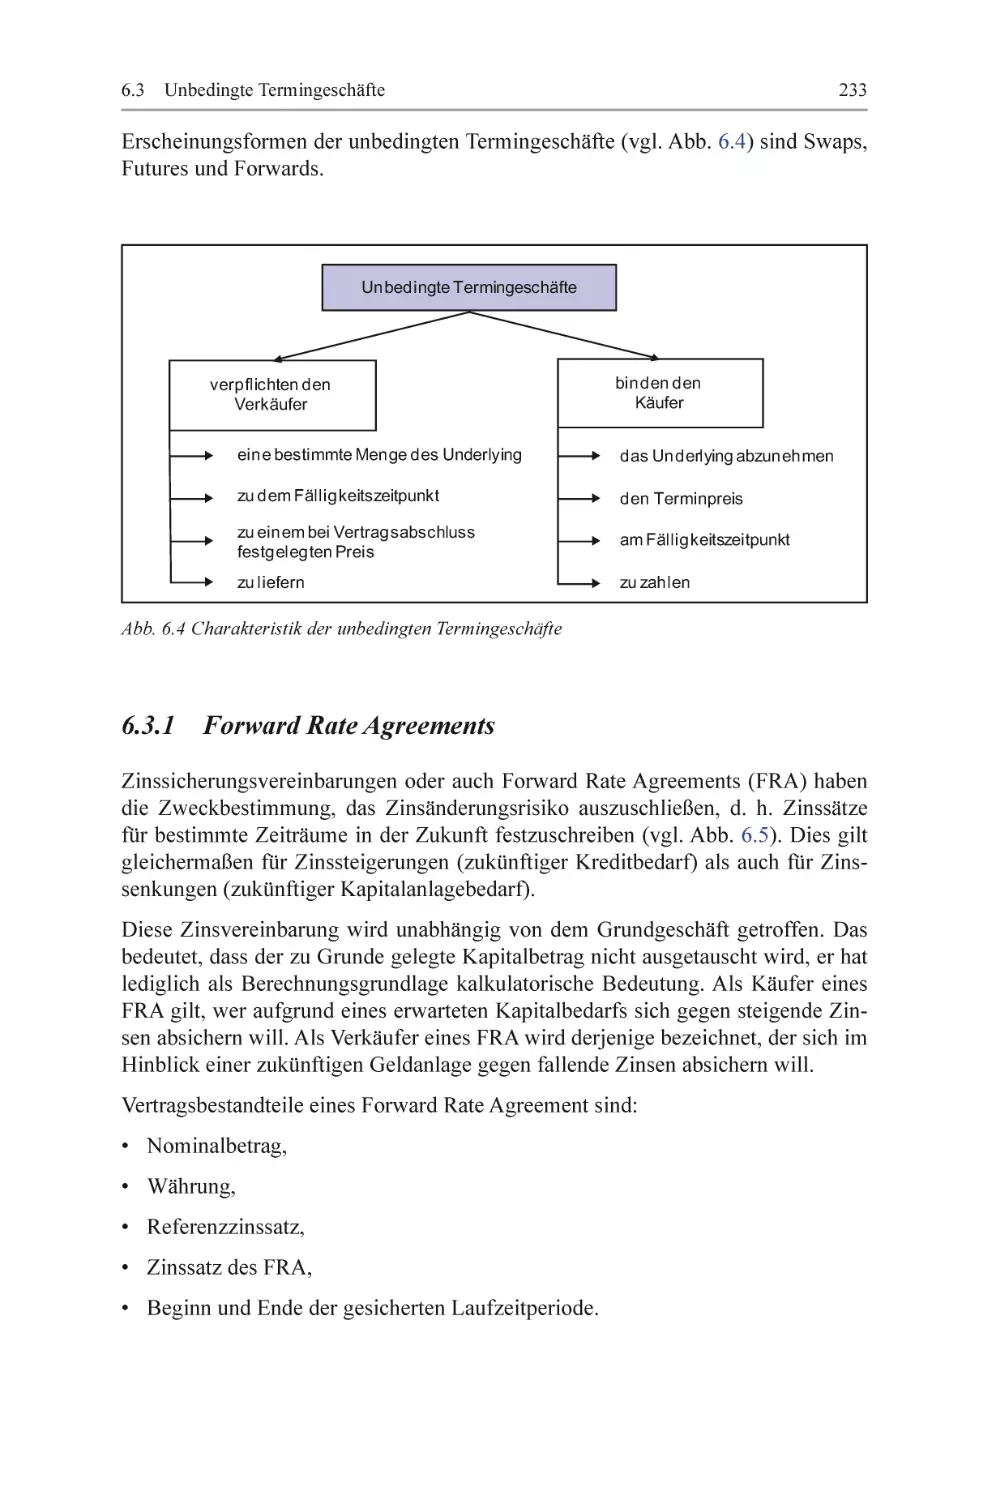 6.3.1 Forward Rate Agreements